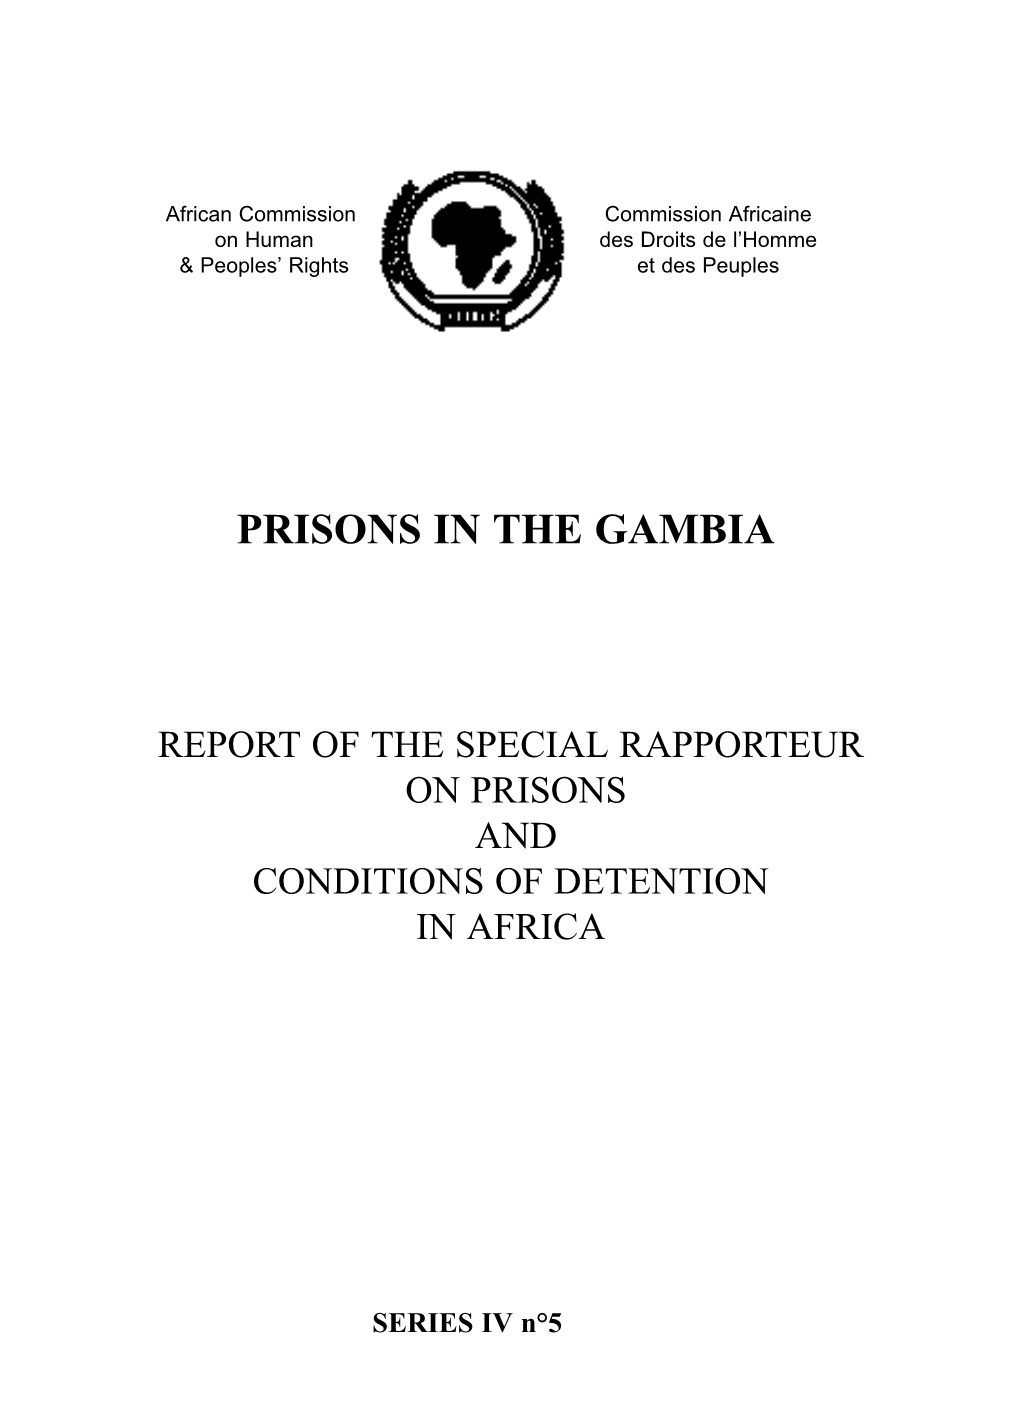 Prisons in the Gambia